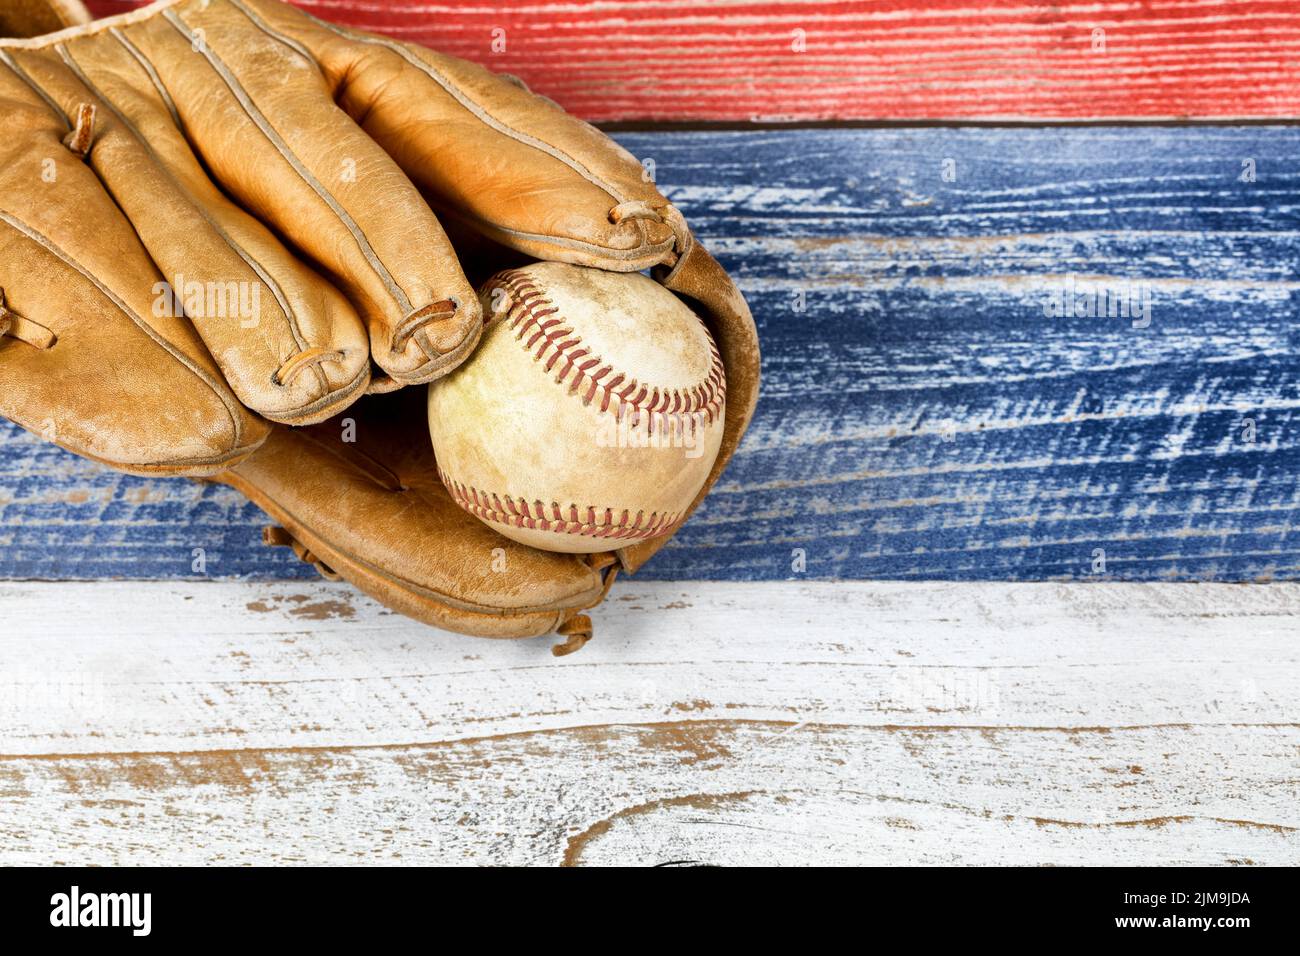 Old worn baseball mitt and ball on faded boards painted in American national colors Stock Photo